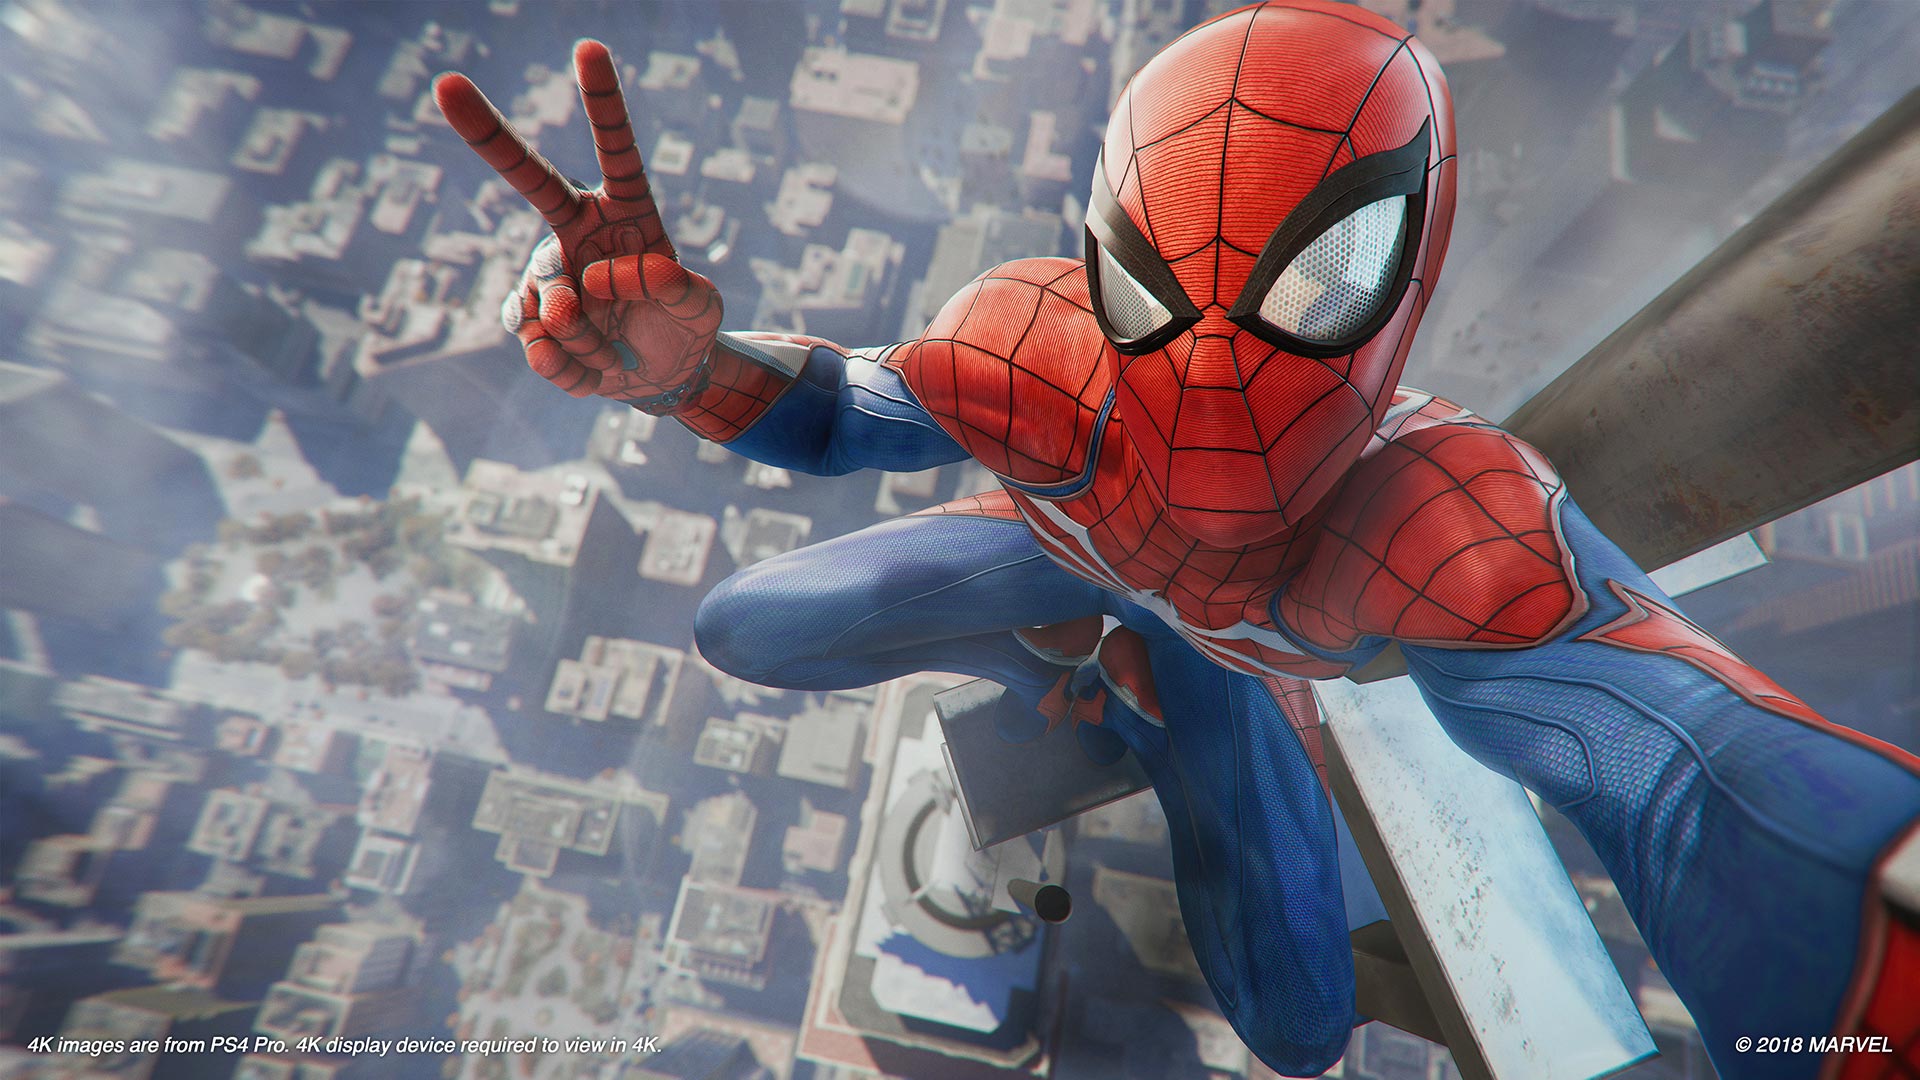 Marvel's Spider-Man truly makes you feel like Spider-Man